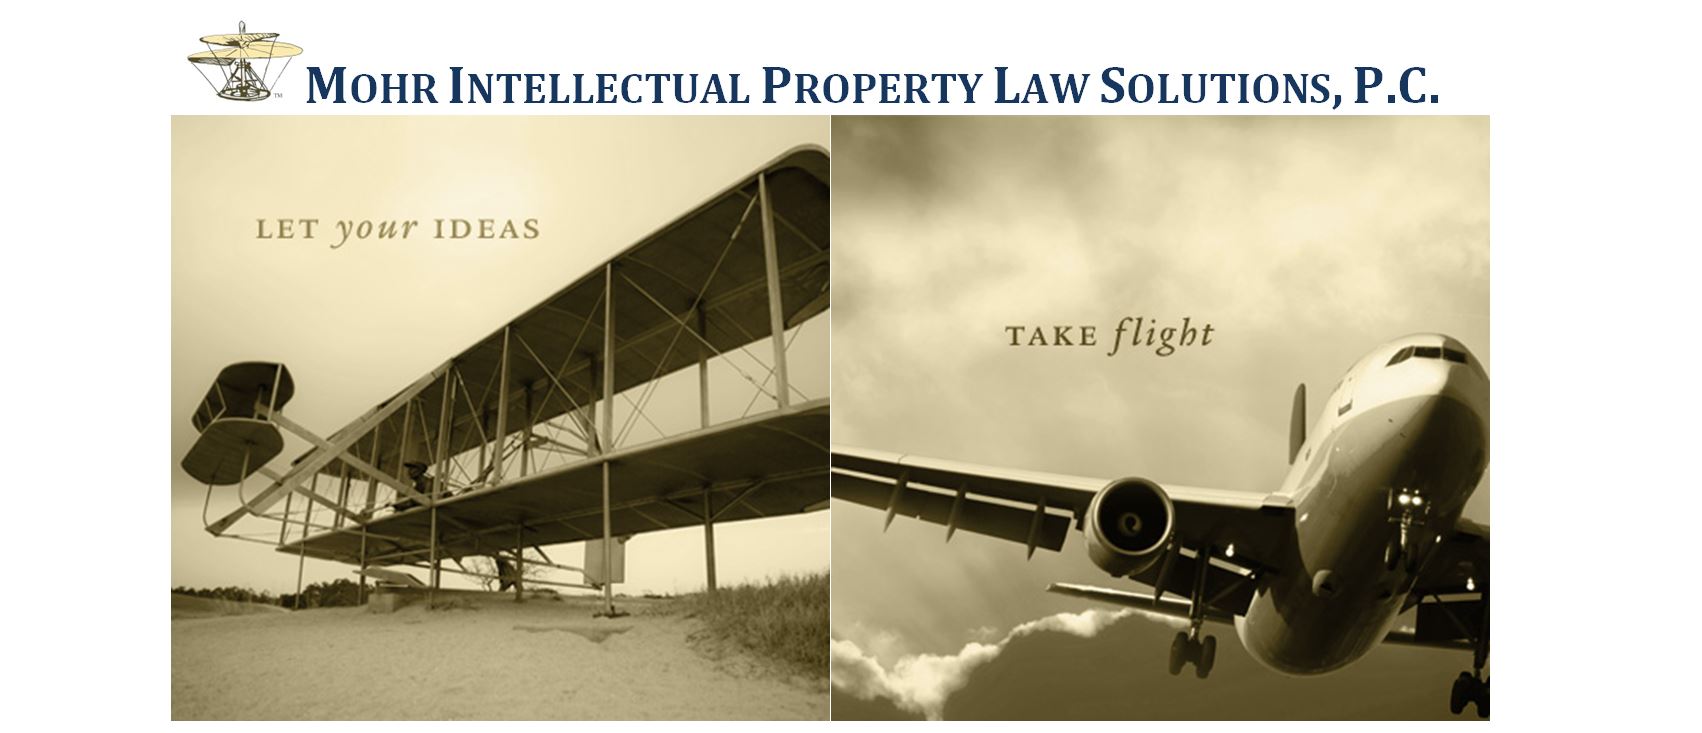 Mohr Intellectual Property Law Solutions, P.C. reviews | 522 SW 5th Ave Suite 1390 - Portland OR